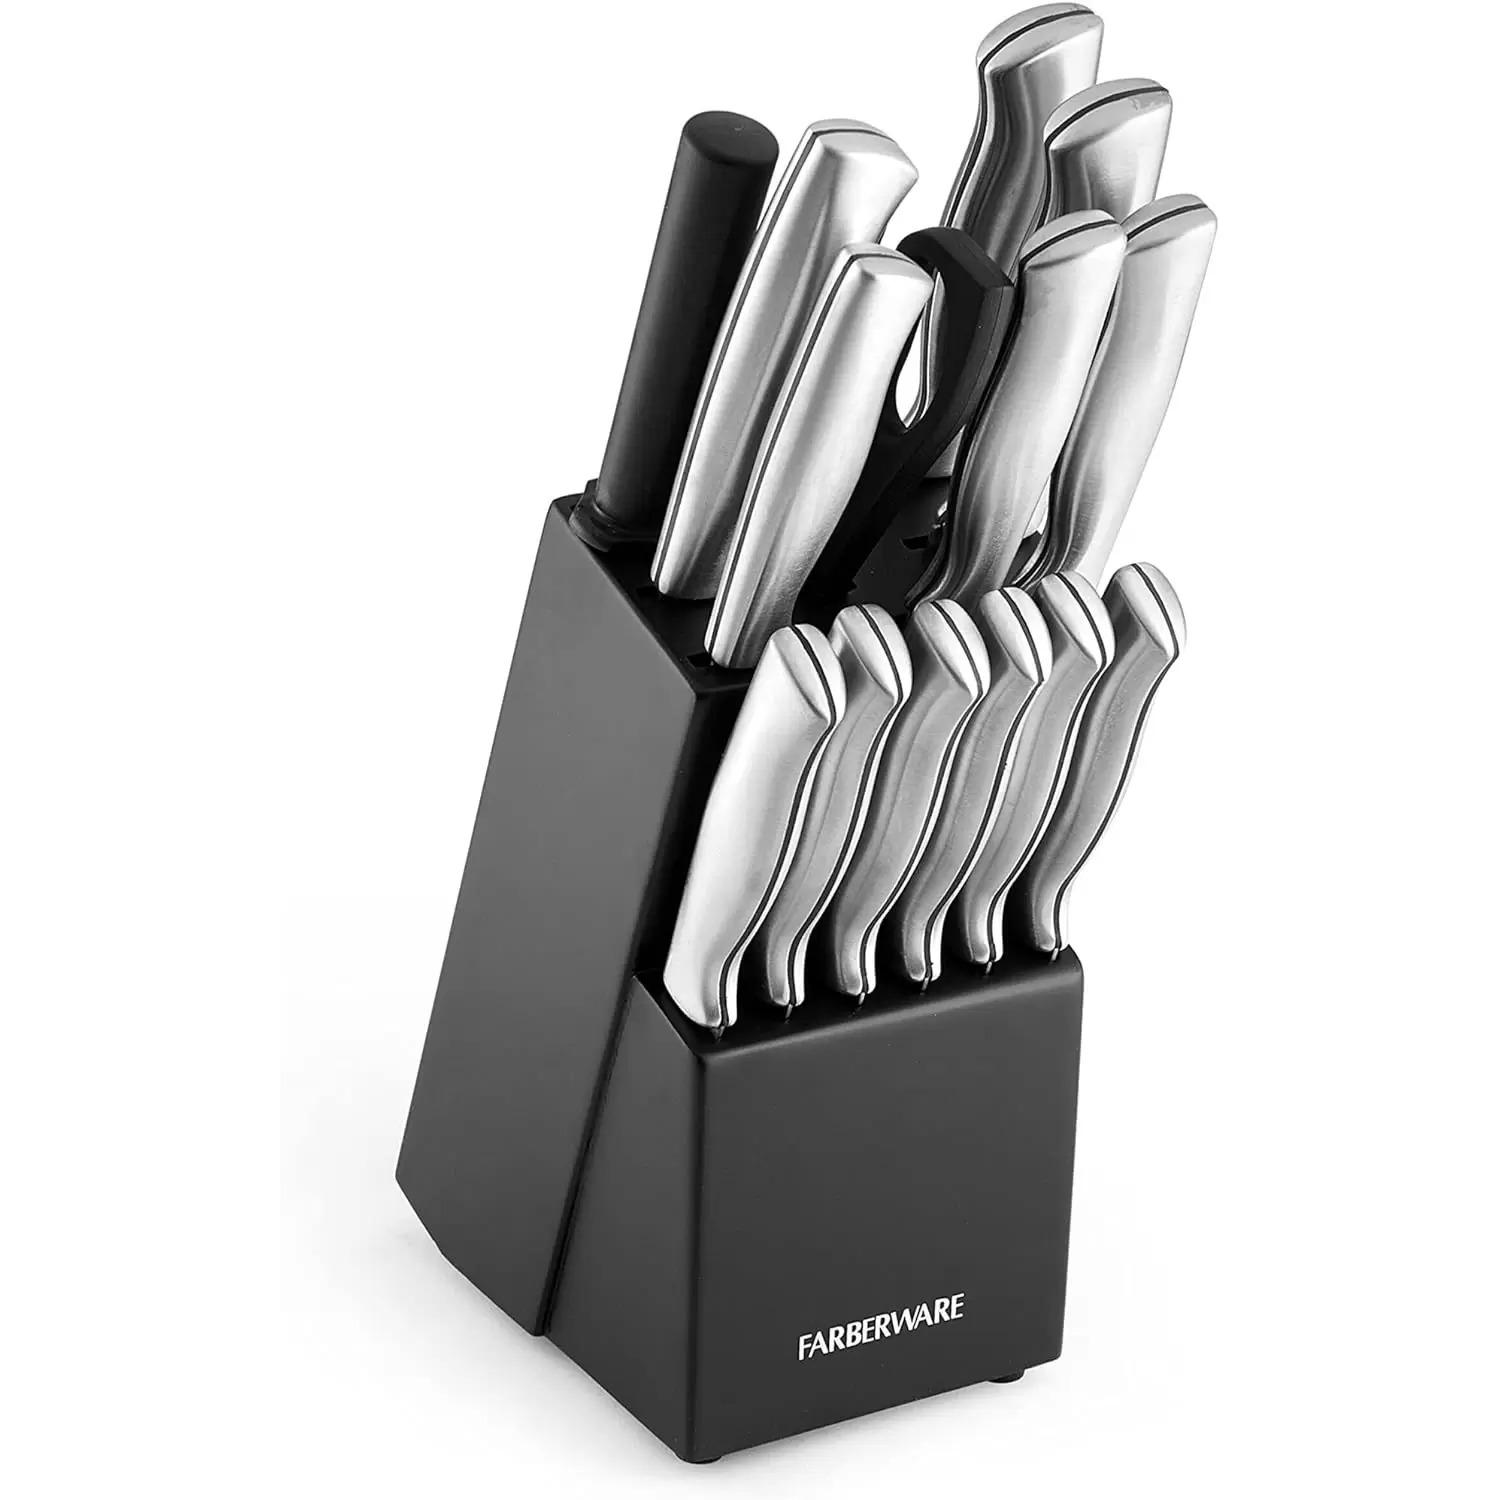 Farberware High Carbon Stamped Stainless Steel Knife Set for $19.99